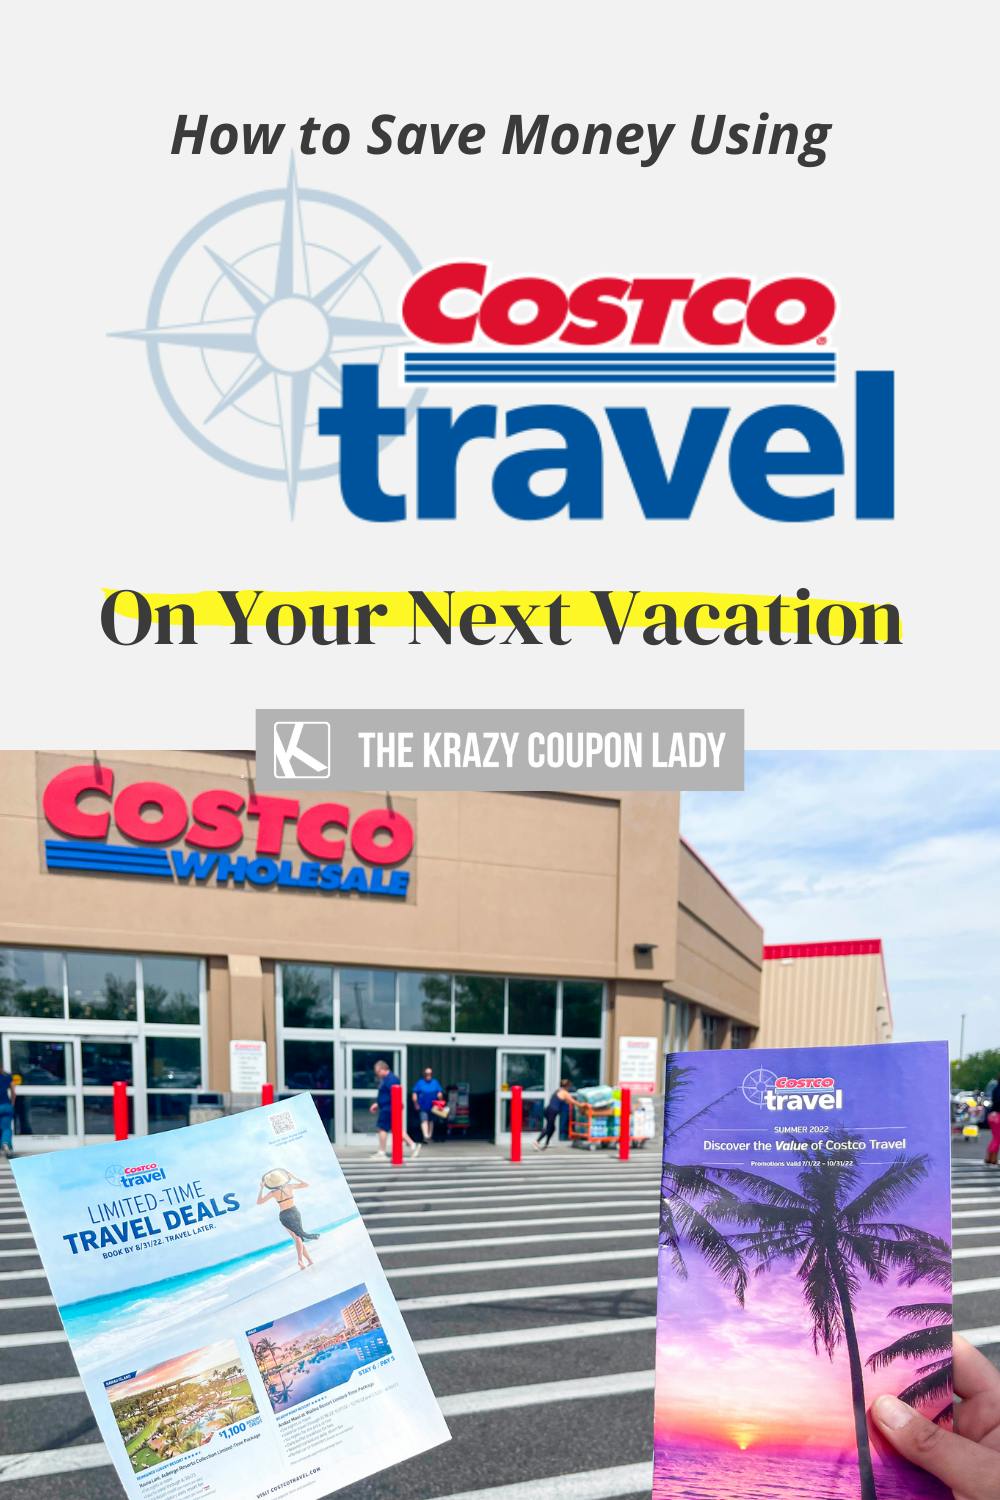 How Costco Travel Gets Such Deep Discounts on Vacation Packages